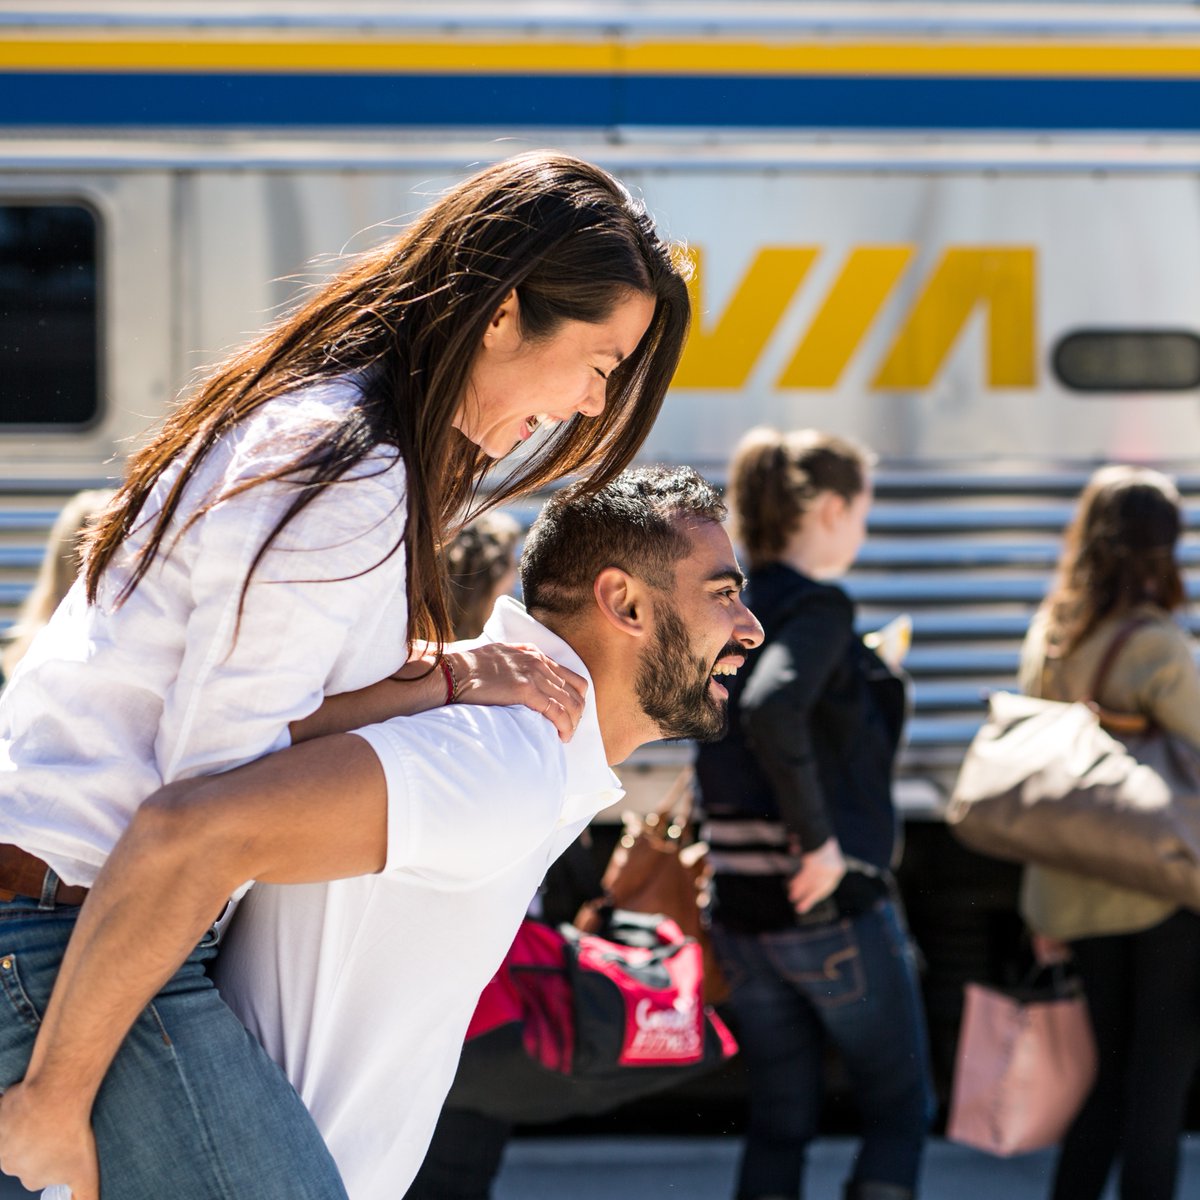 Our Summer Sale is HERE! ☀️ Where will your next adventure take you? Book using discount code VIA2024 by May 7 to save up to 40%* on travel across Canada: viarail.ca/en/offers/sale…